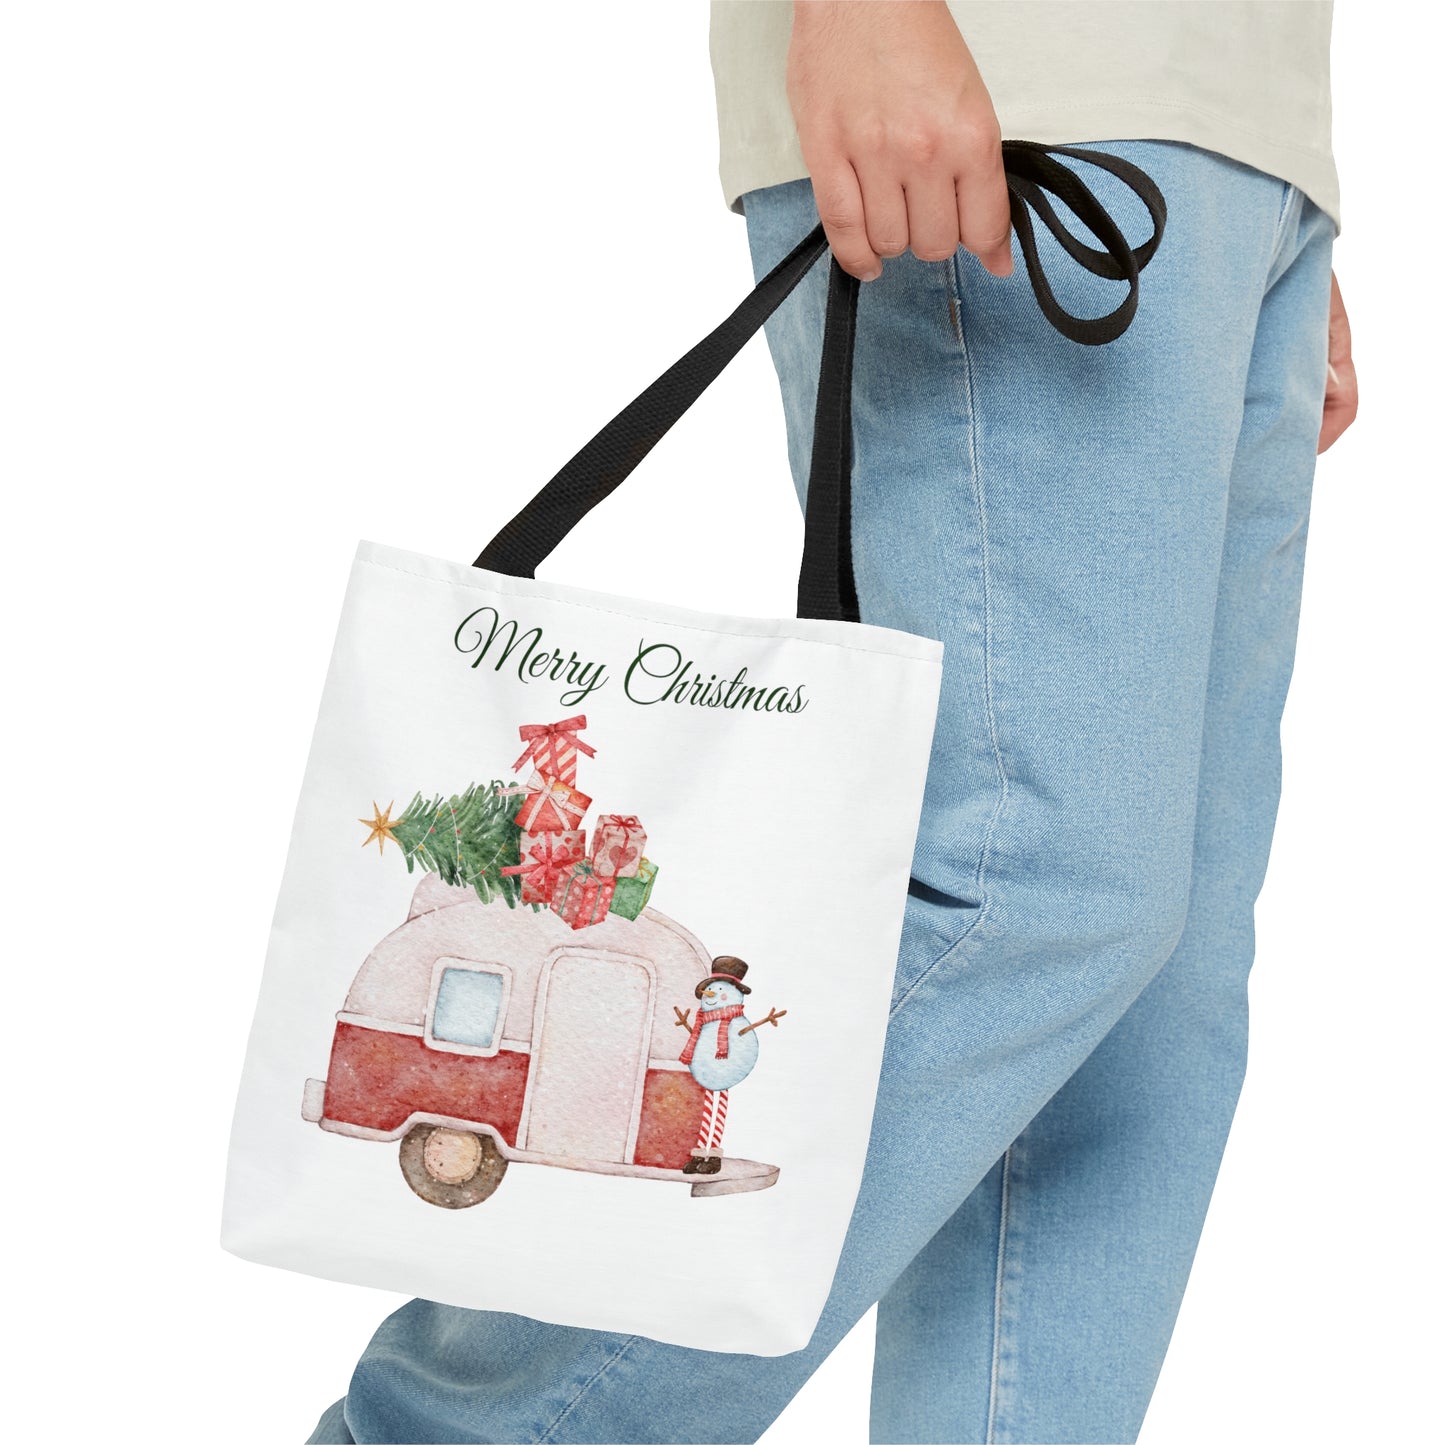 Merry Christmas Printed Tote Bags for Her & Him